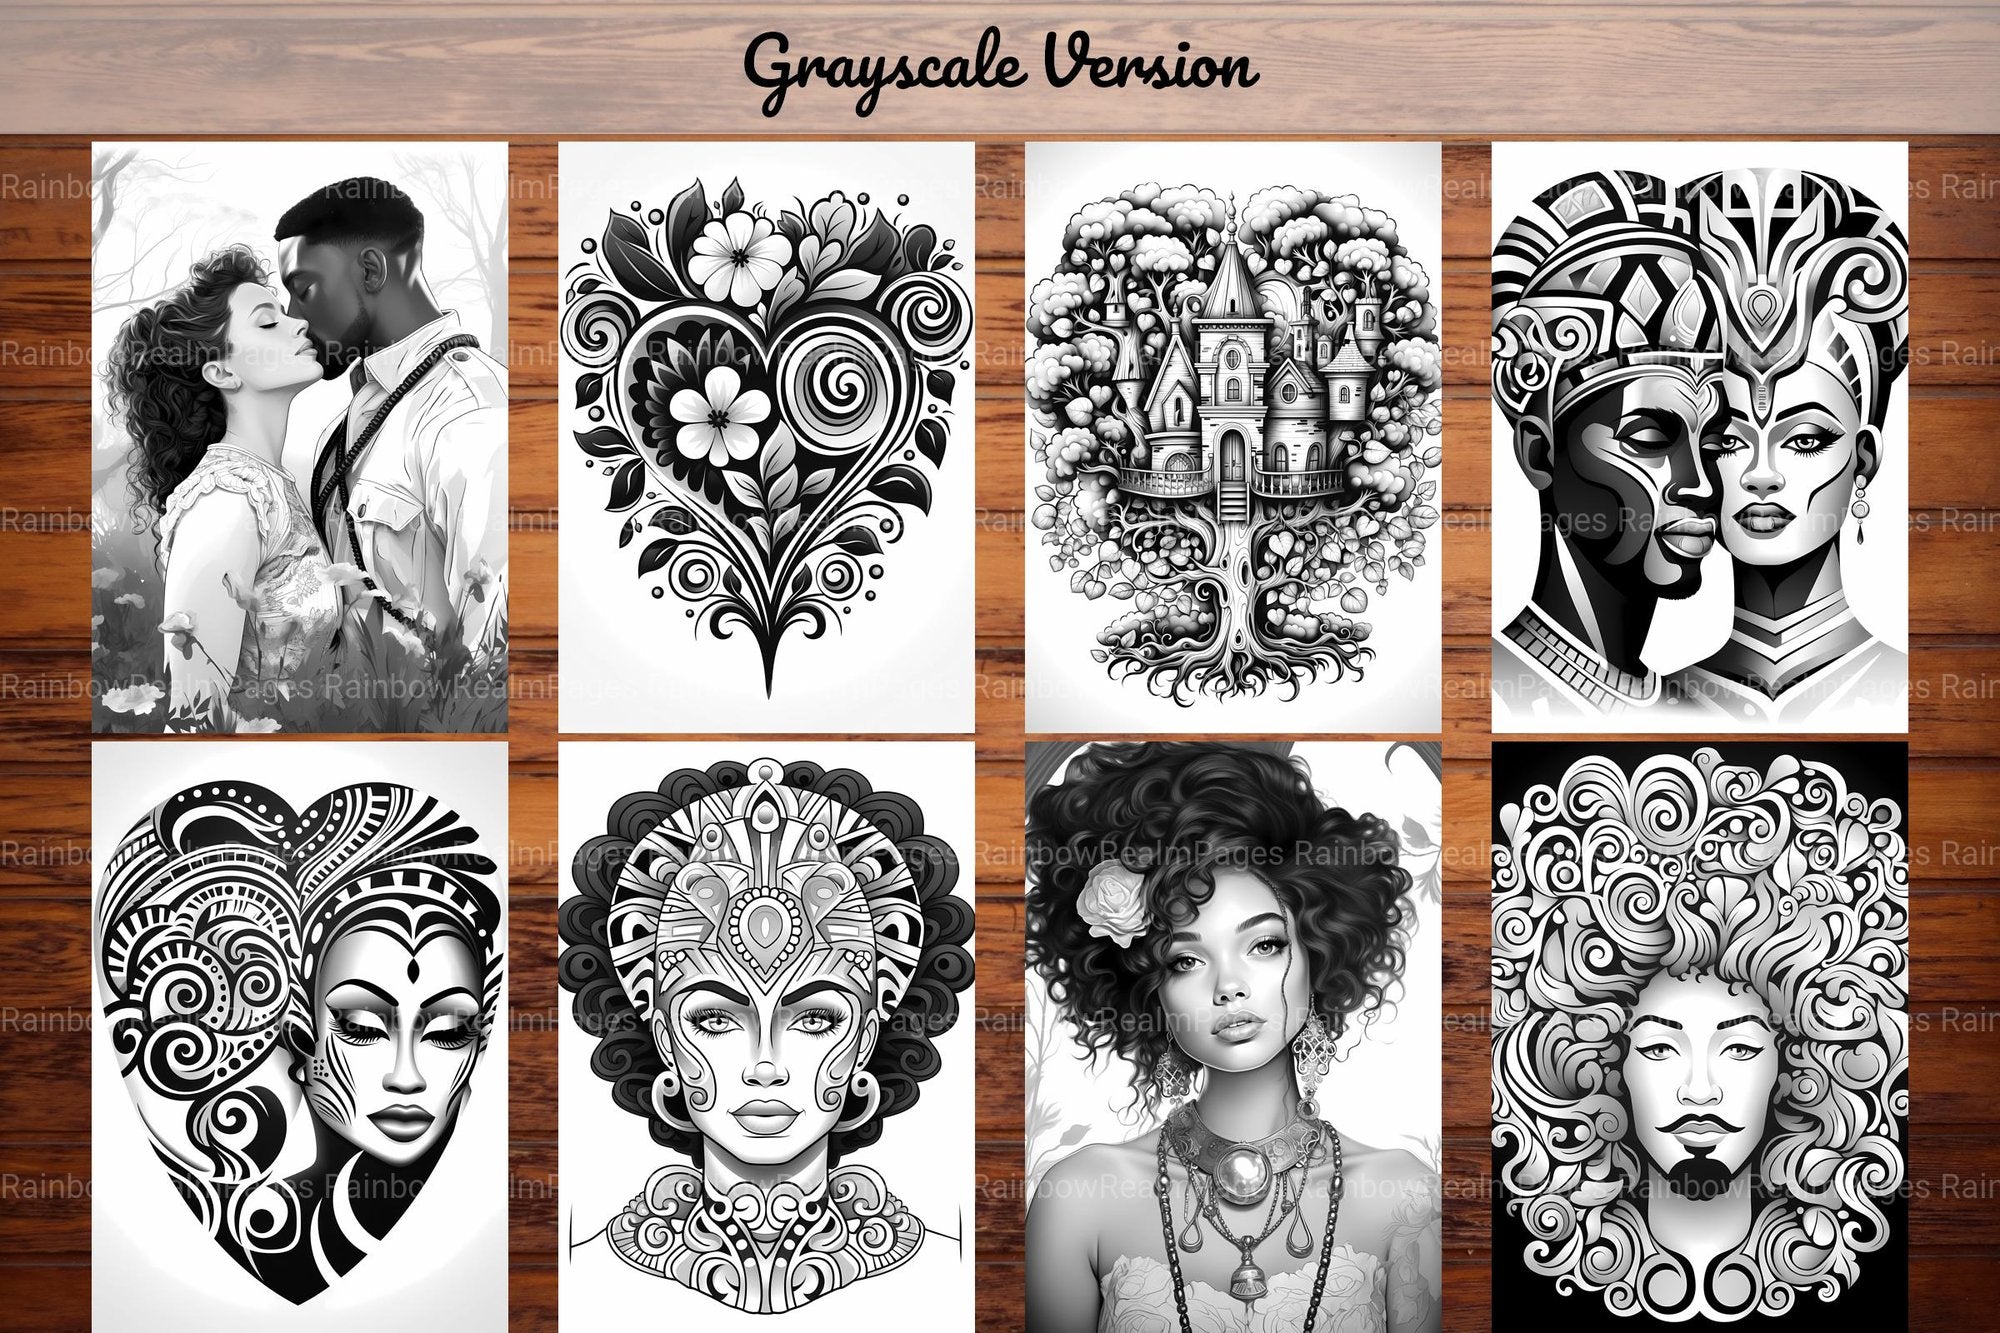 Afro-American Valentines Day Coloring Books - CraftNest